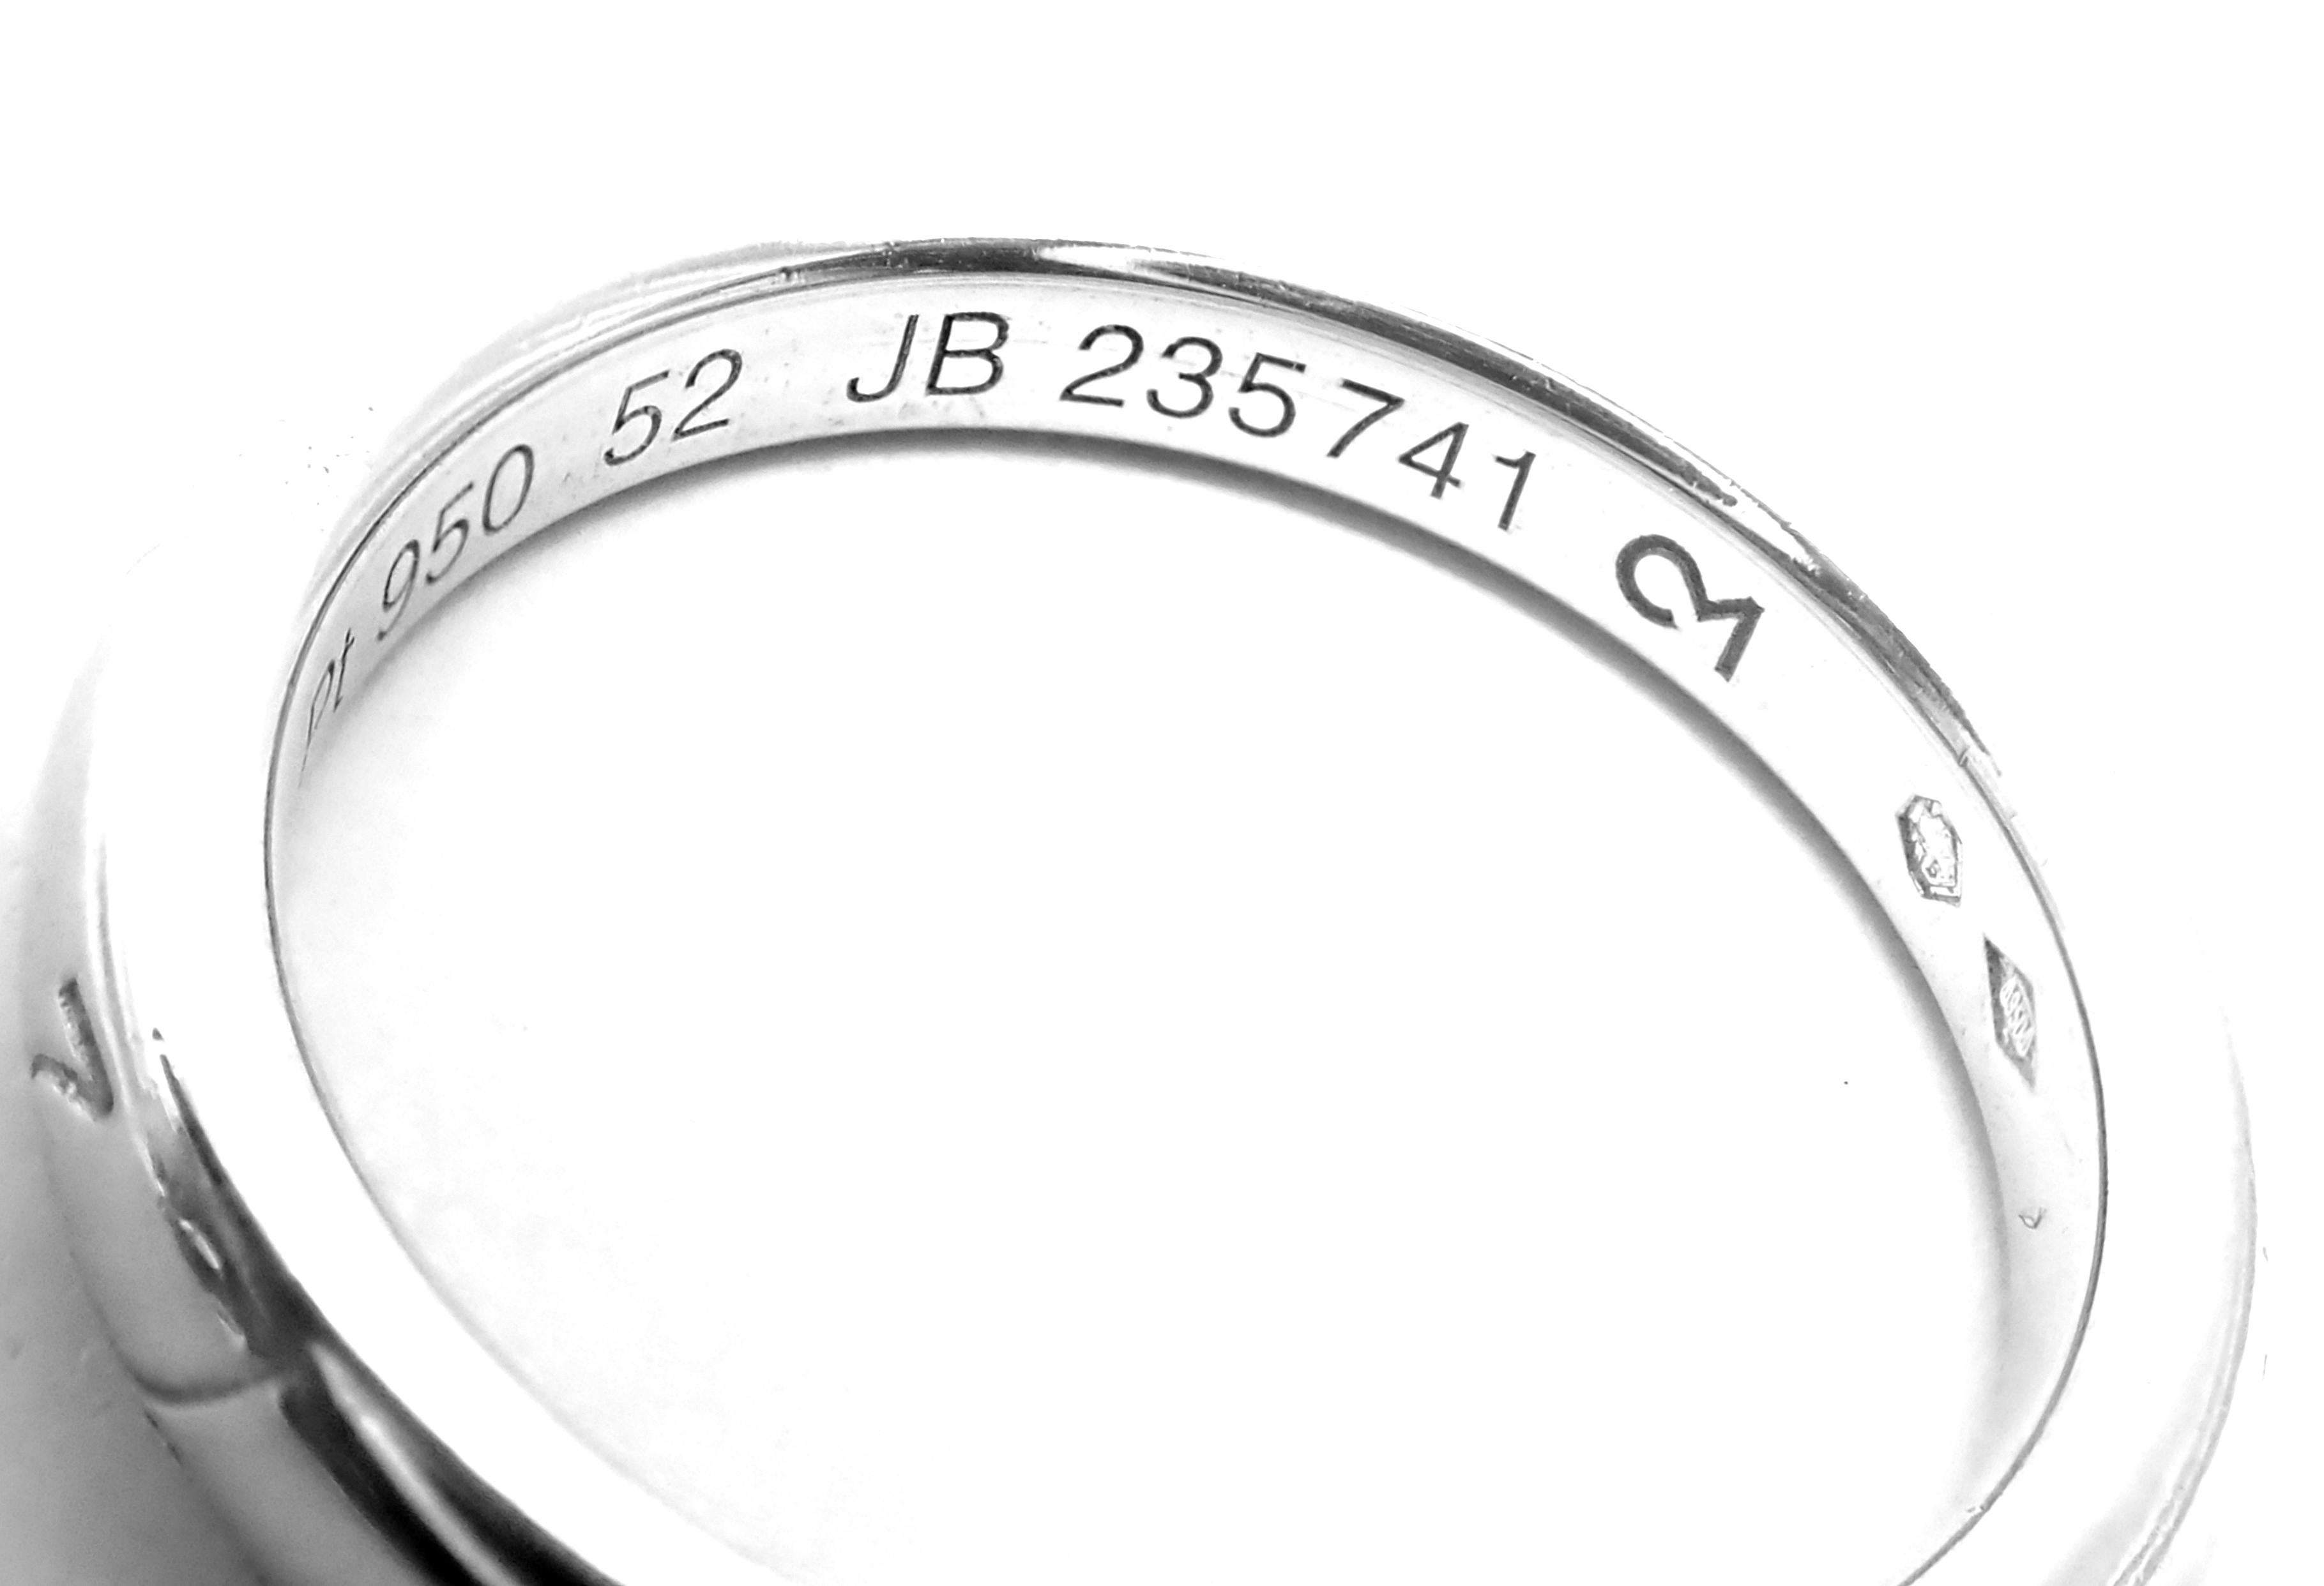 Platinum Infini Signature 3mm Wide Wedding Band Ring by Van Cleef & Arpels.
Details:
Ring Size: European 52, US 6
Width: 3mm
Weight: 6.5 grams
Stamped Hallmarks: VCA PT950 52 JB235741
*Free Shipping within the United States*
YOUR PRICE: